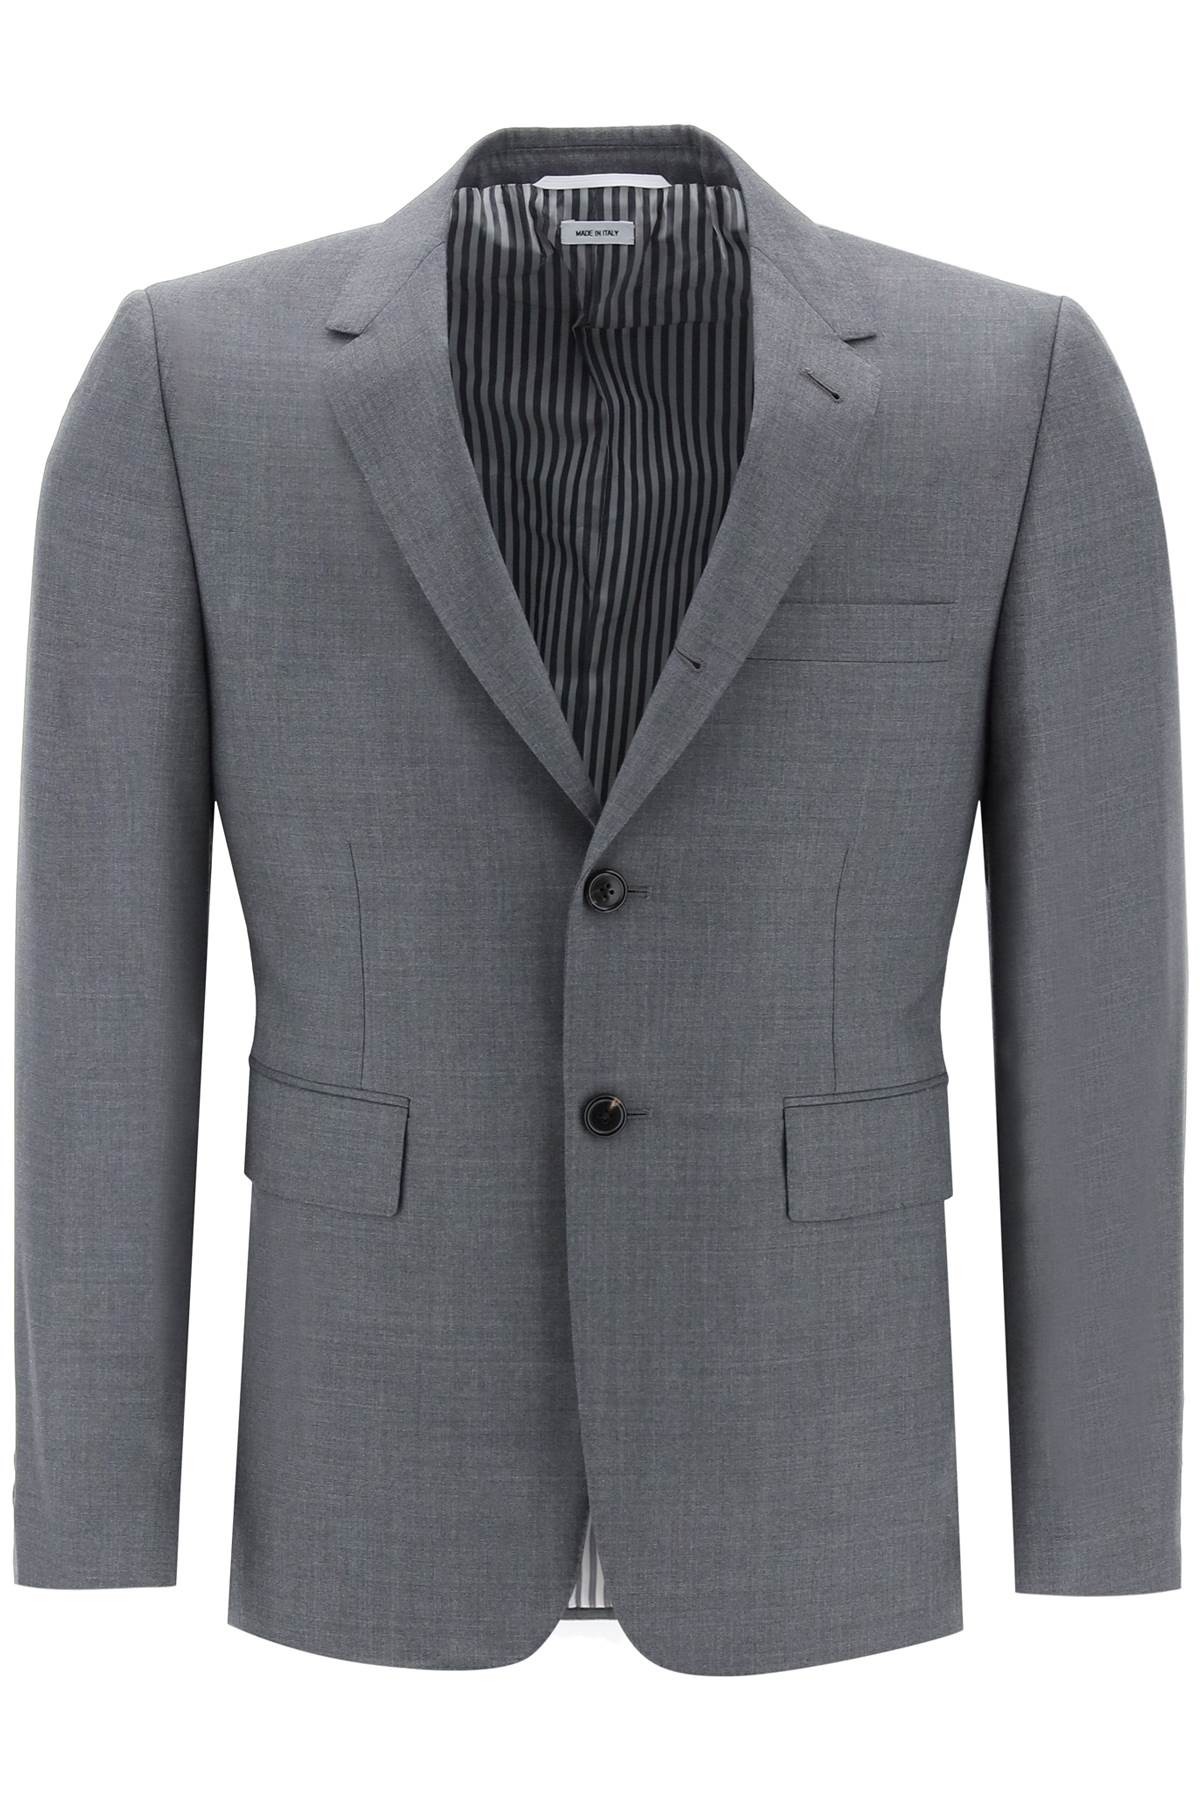 Thom Browne Classic Sport Jacket Jacket In Gray